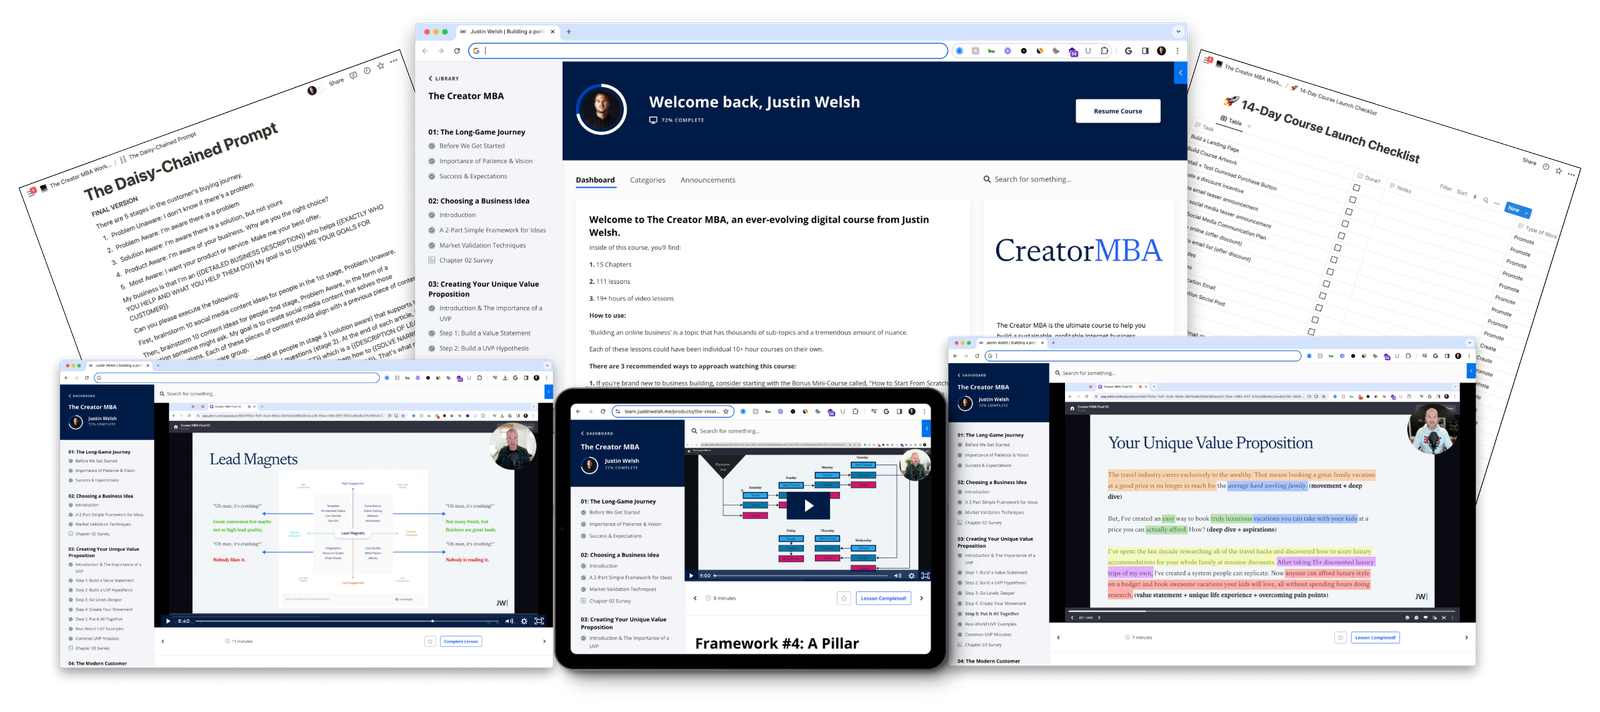 An Honest Review of The Creator MBA